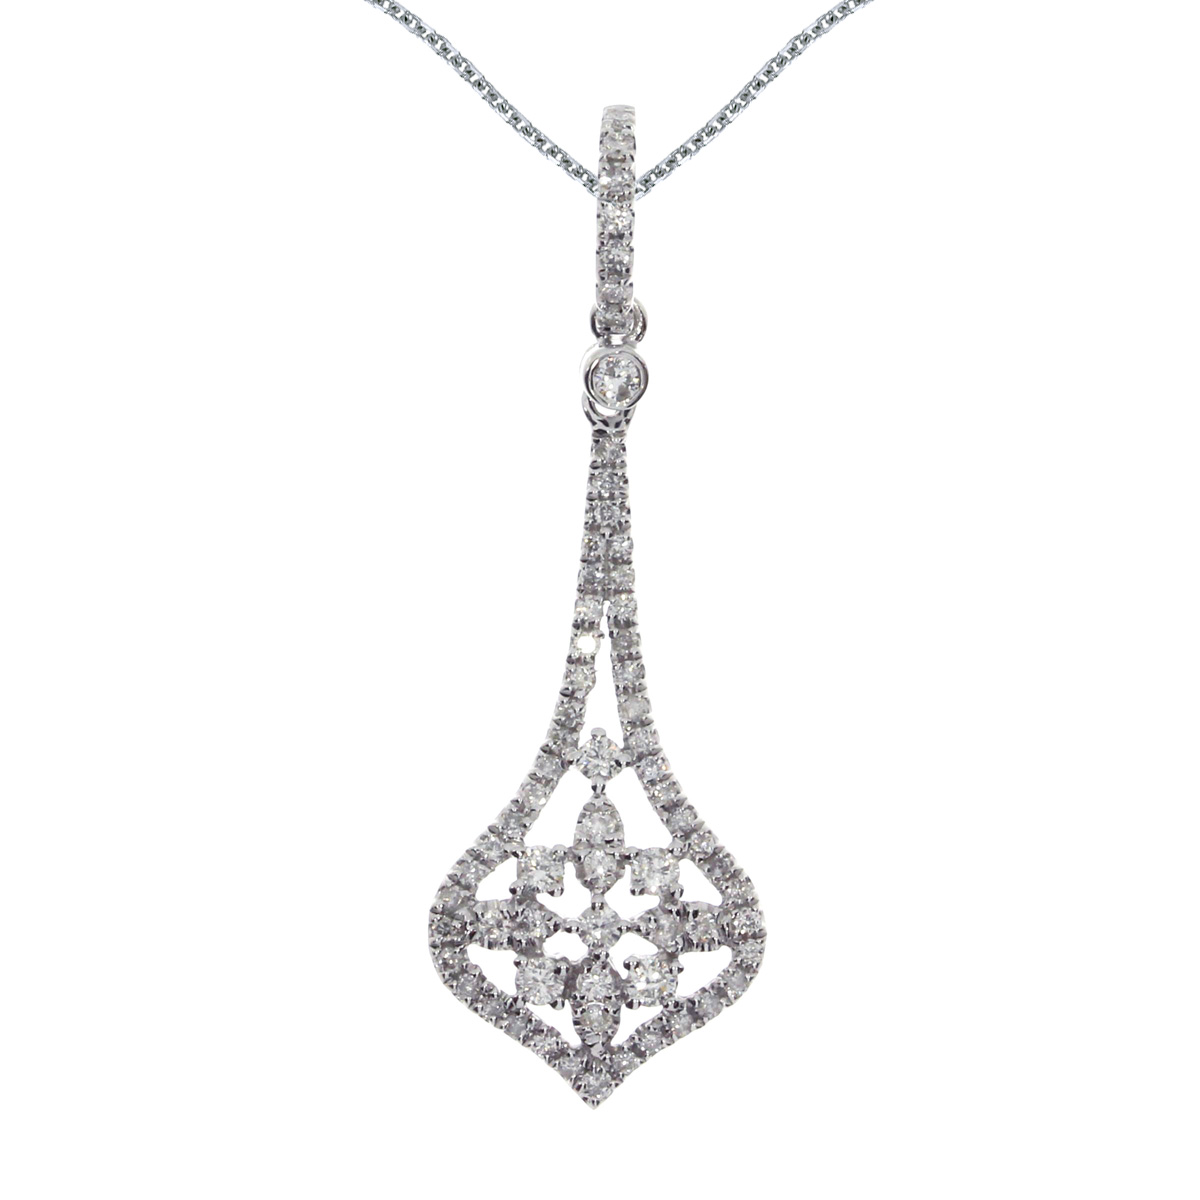 This elegant fashion pendant features .47 total ct diamonds in a beautiful 14k white gold design.